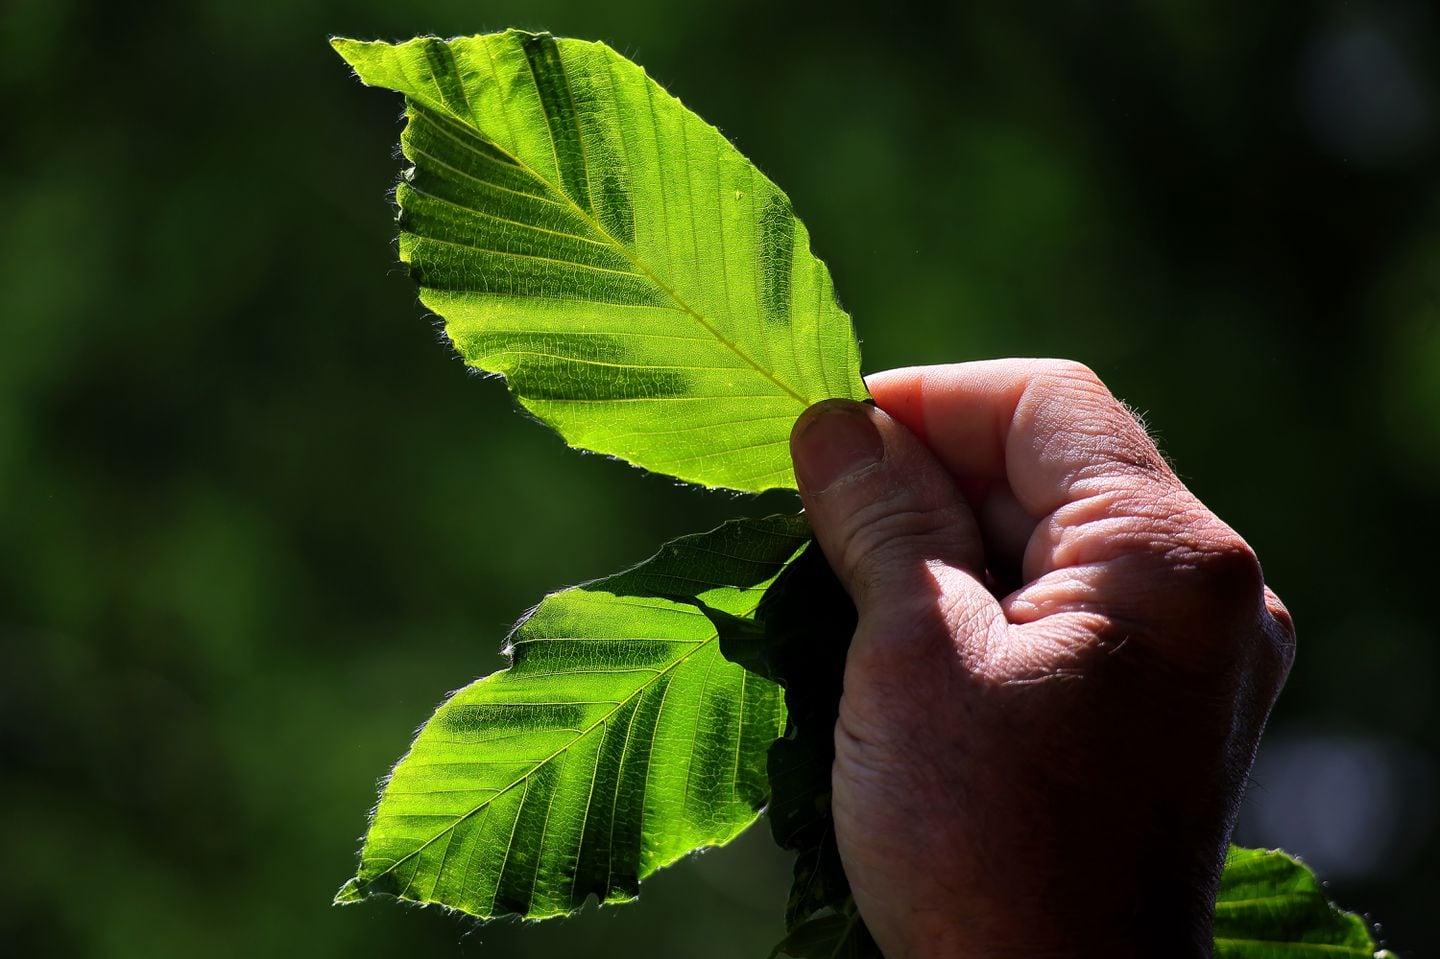 Boston, MA.  06/05/24 -  DelRosso holds up some beech leaves to reveal the patterned dark spots caused by disease.  Numerous varieties of beech tree in the Arnold Arboretum suffer attacks from nematodes that spread disease, with many of the trees unlikely to survive another year, according to Head Arborist John DelRosso (cq).  (Lane Turner/Globe Staff) Reporter: (Maura Intemann)  Topic: (061624beechdisease). 
